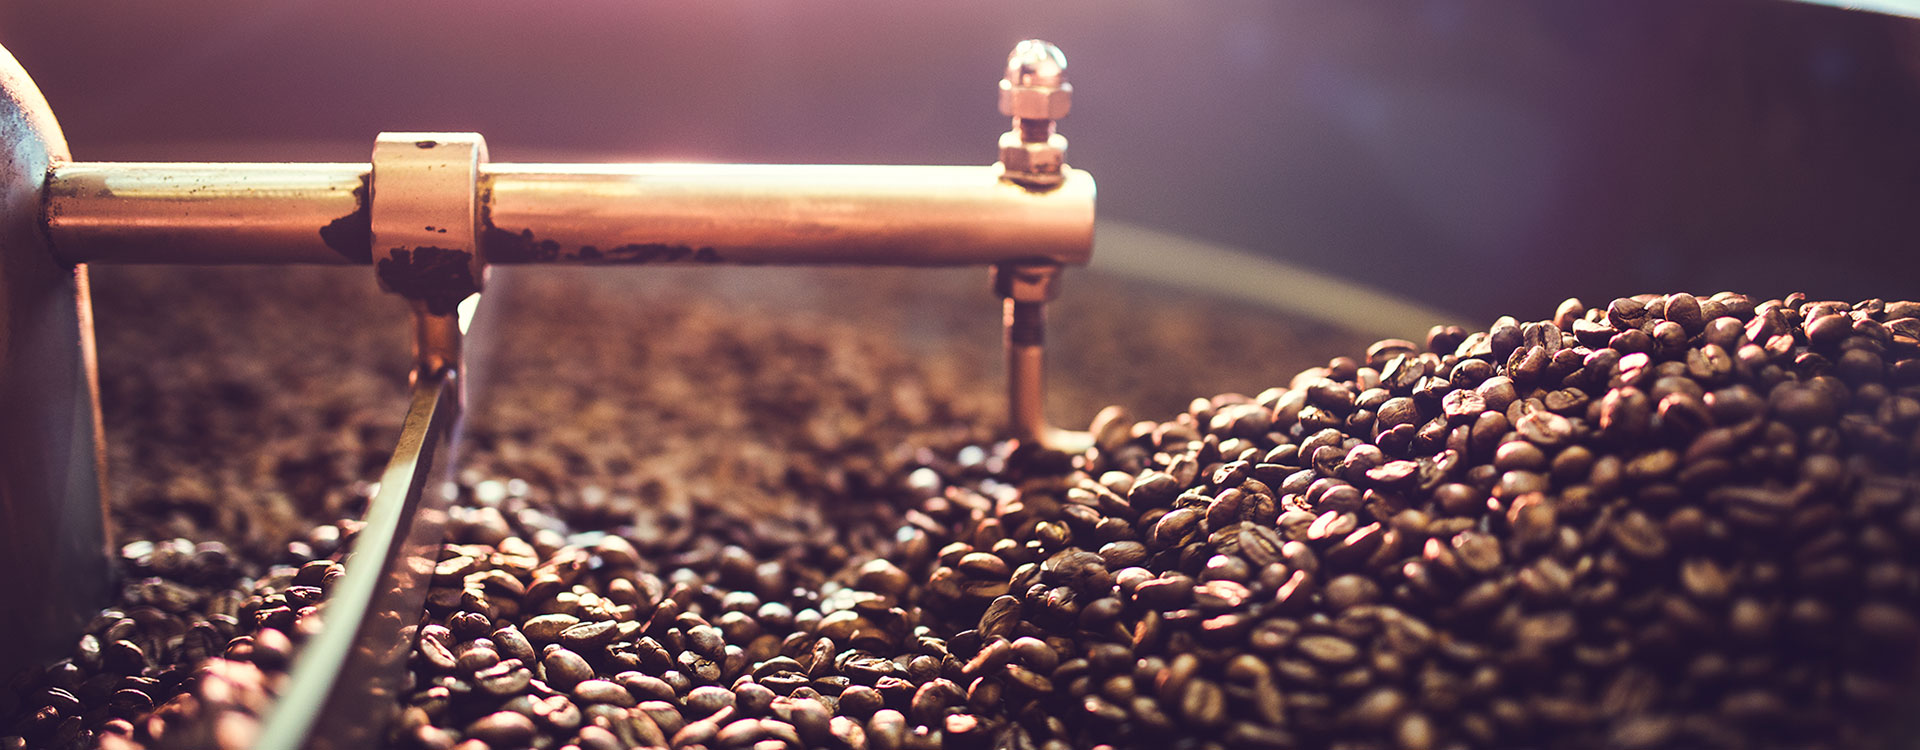 Coffee Beans in Machine